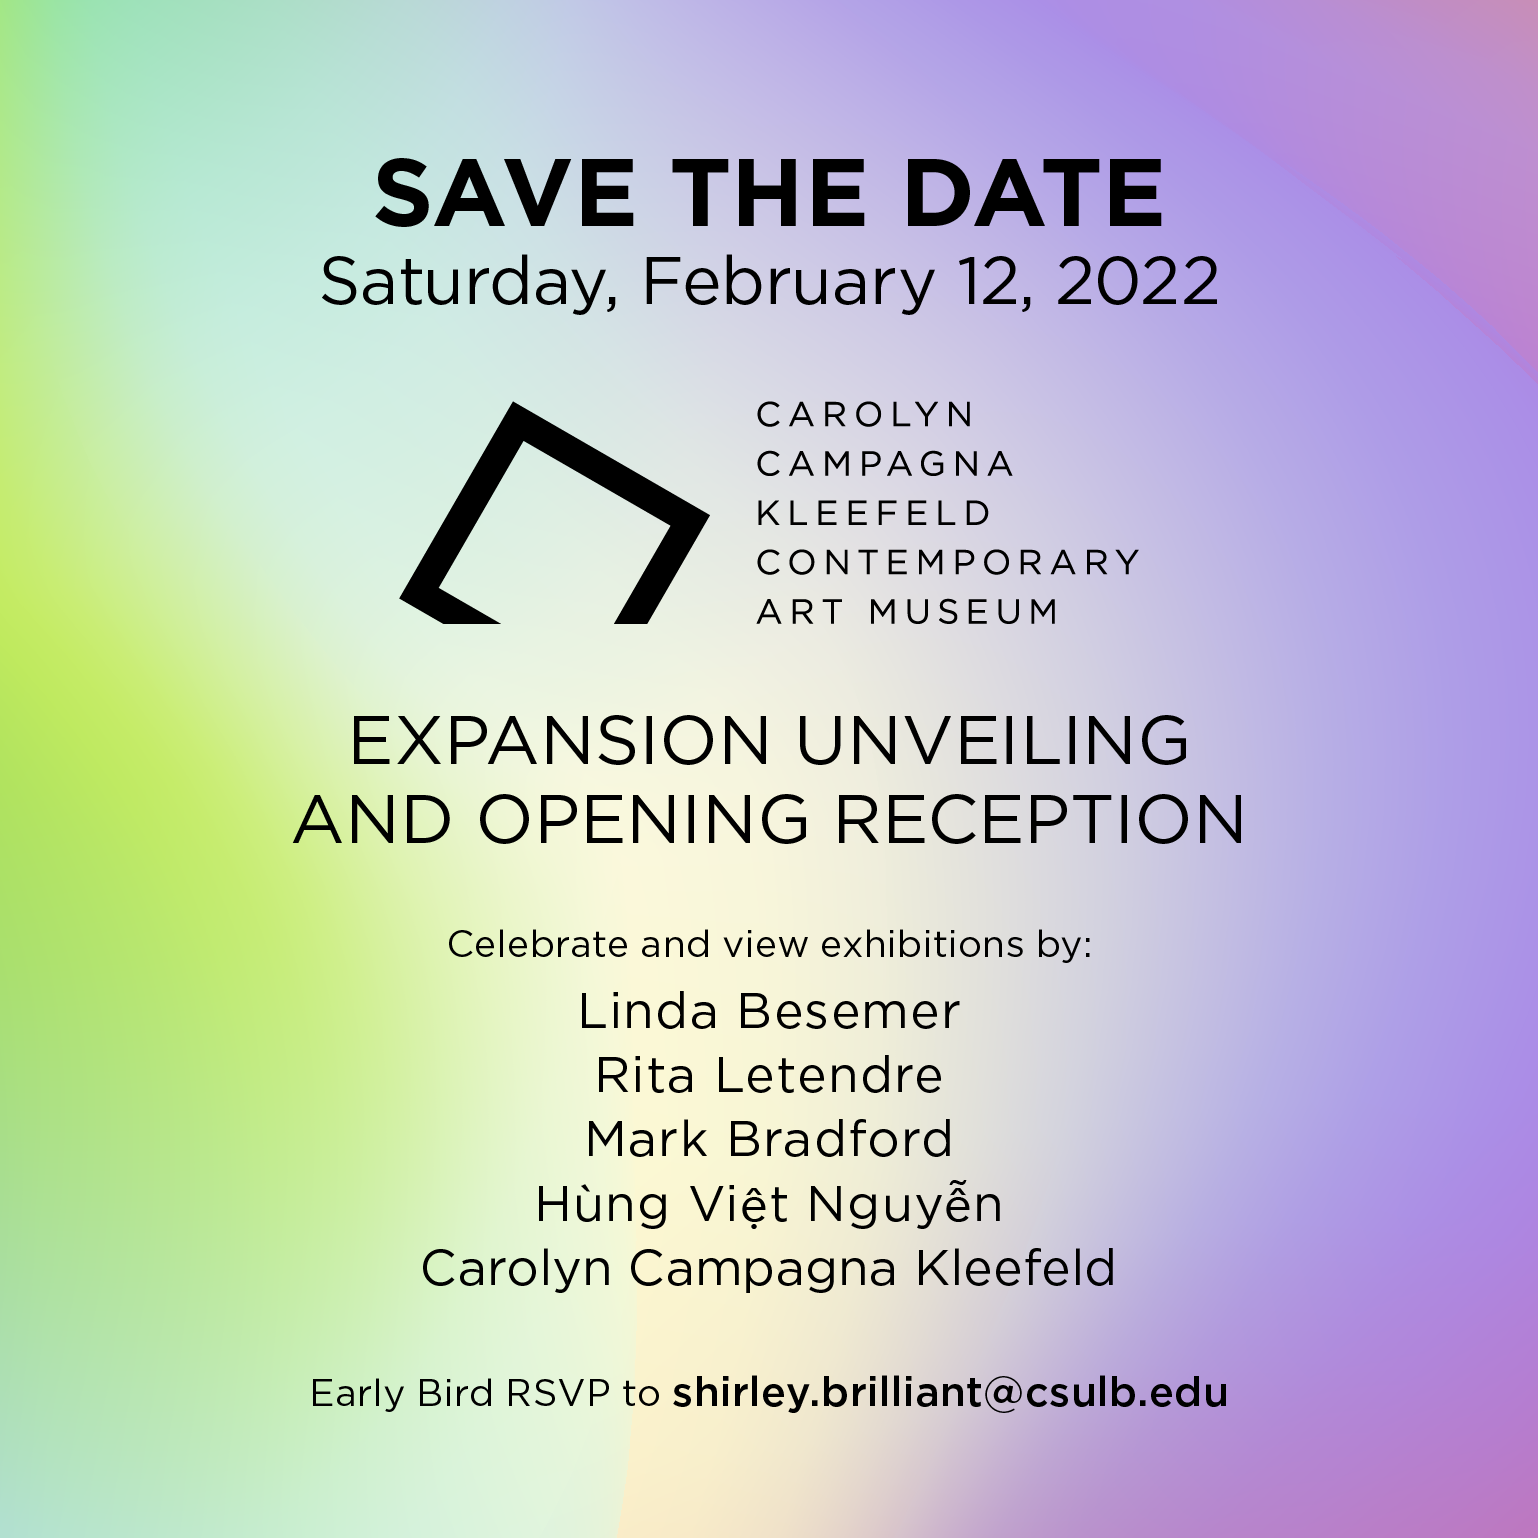 save the date - kleefeld contemporary art museum unveiling 